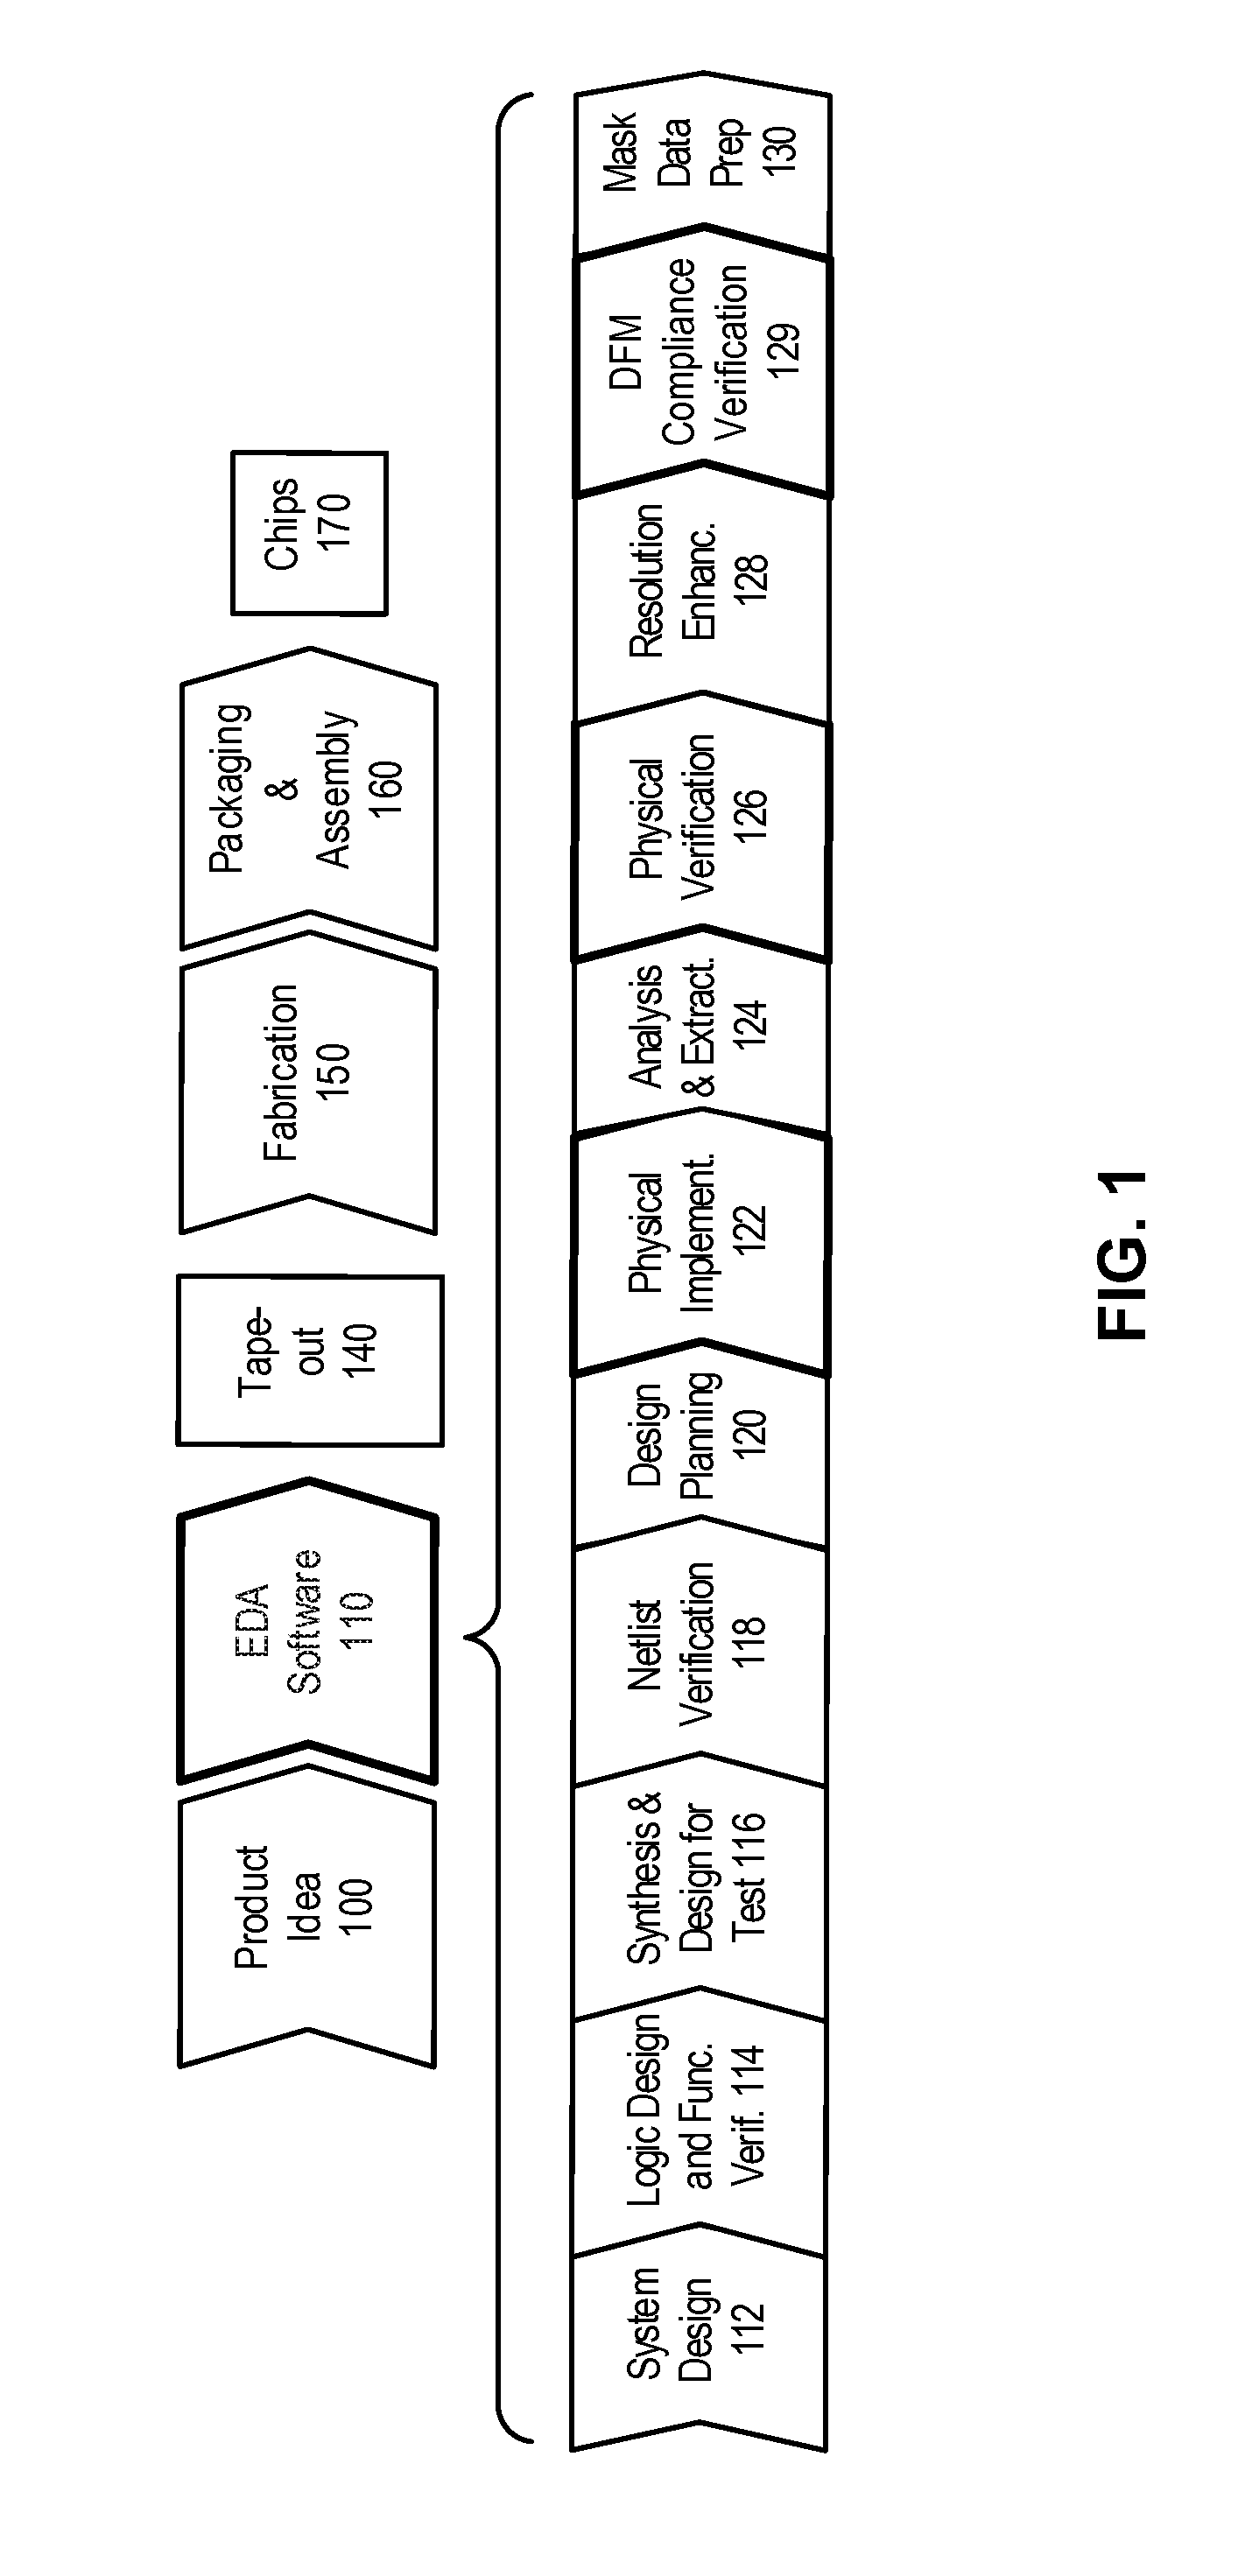 Performing via array merging and parasitic extraction